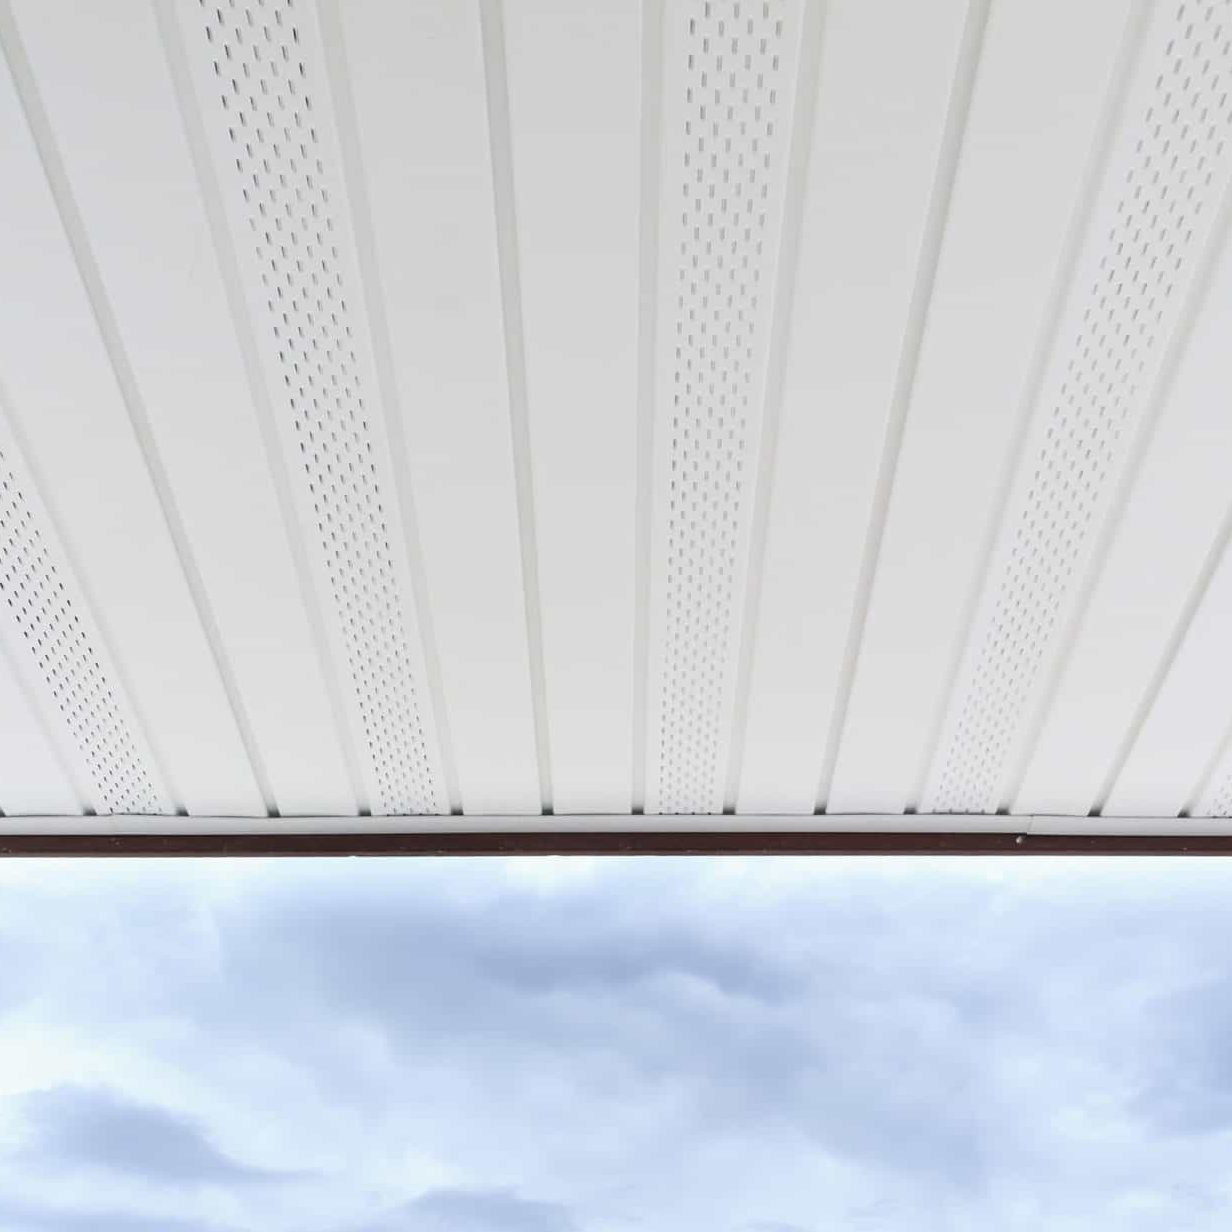 Soffit vents can provide ventilation but need a place for heat to exit the roof